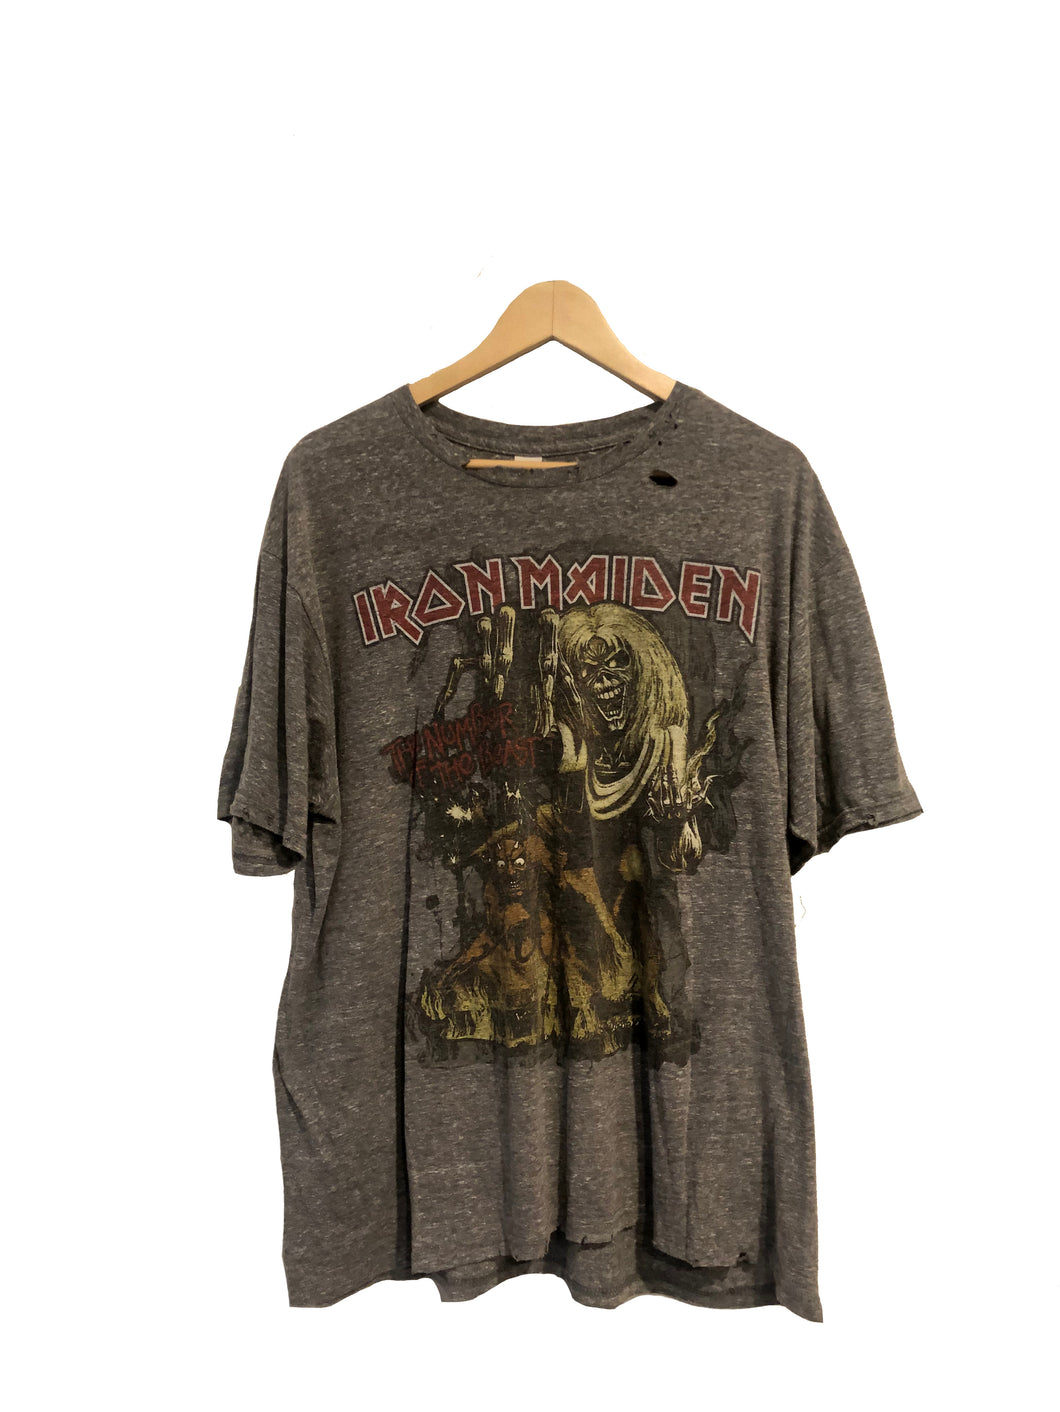 Distressed “Iron Maiden” Band T-Shirt